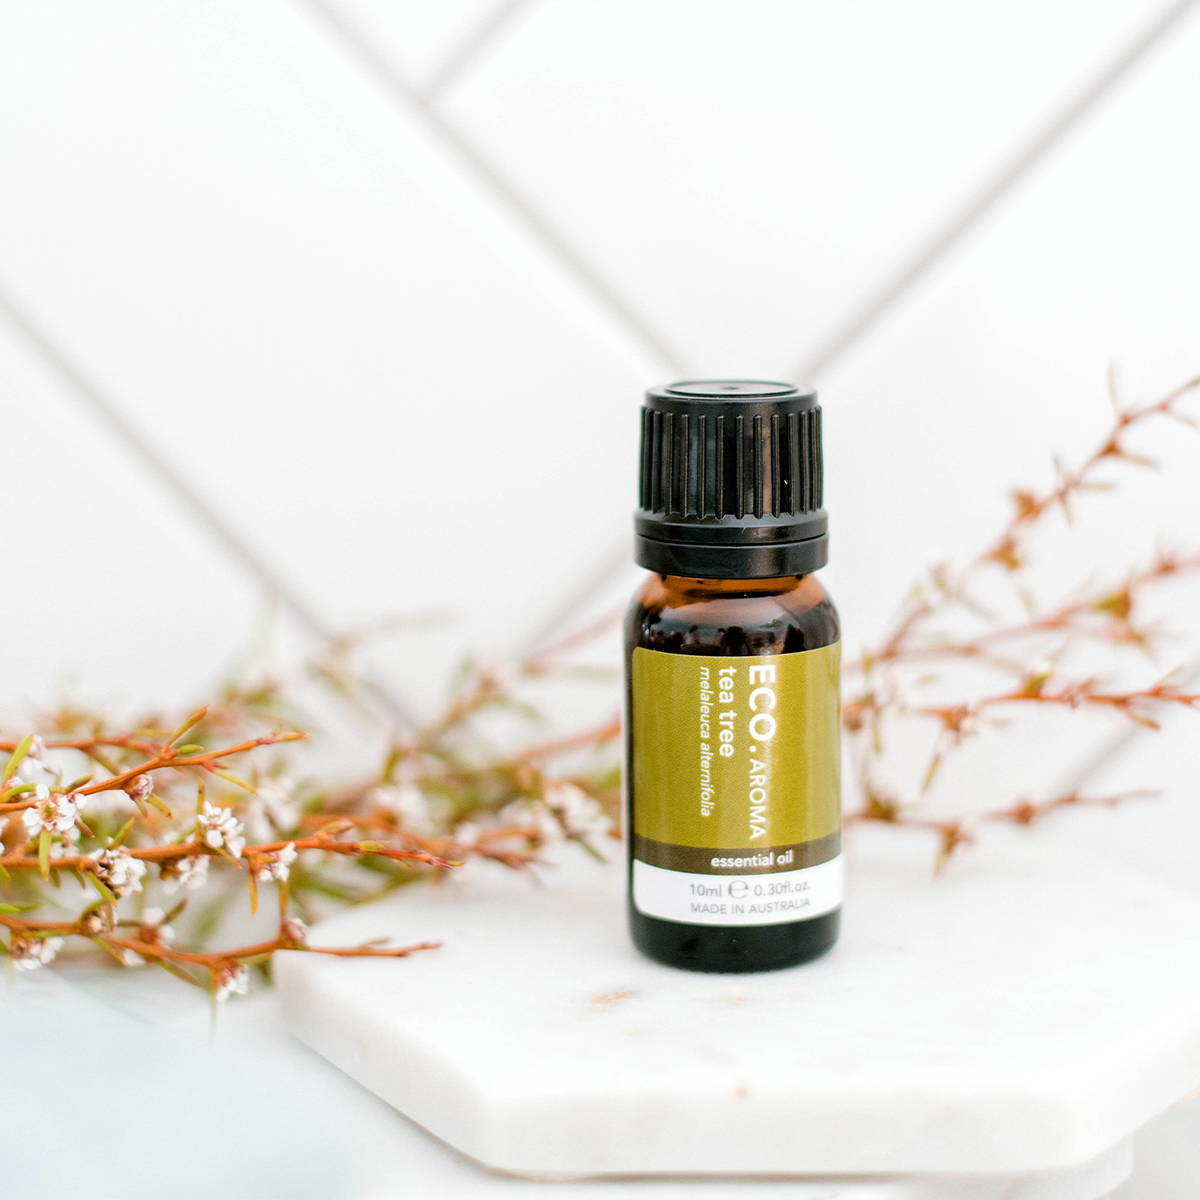 Image of tea tree essential oil bottle surrounded by flowers